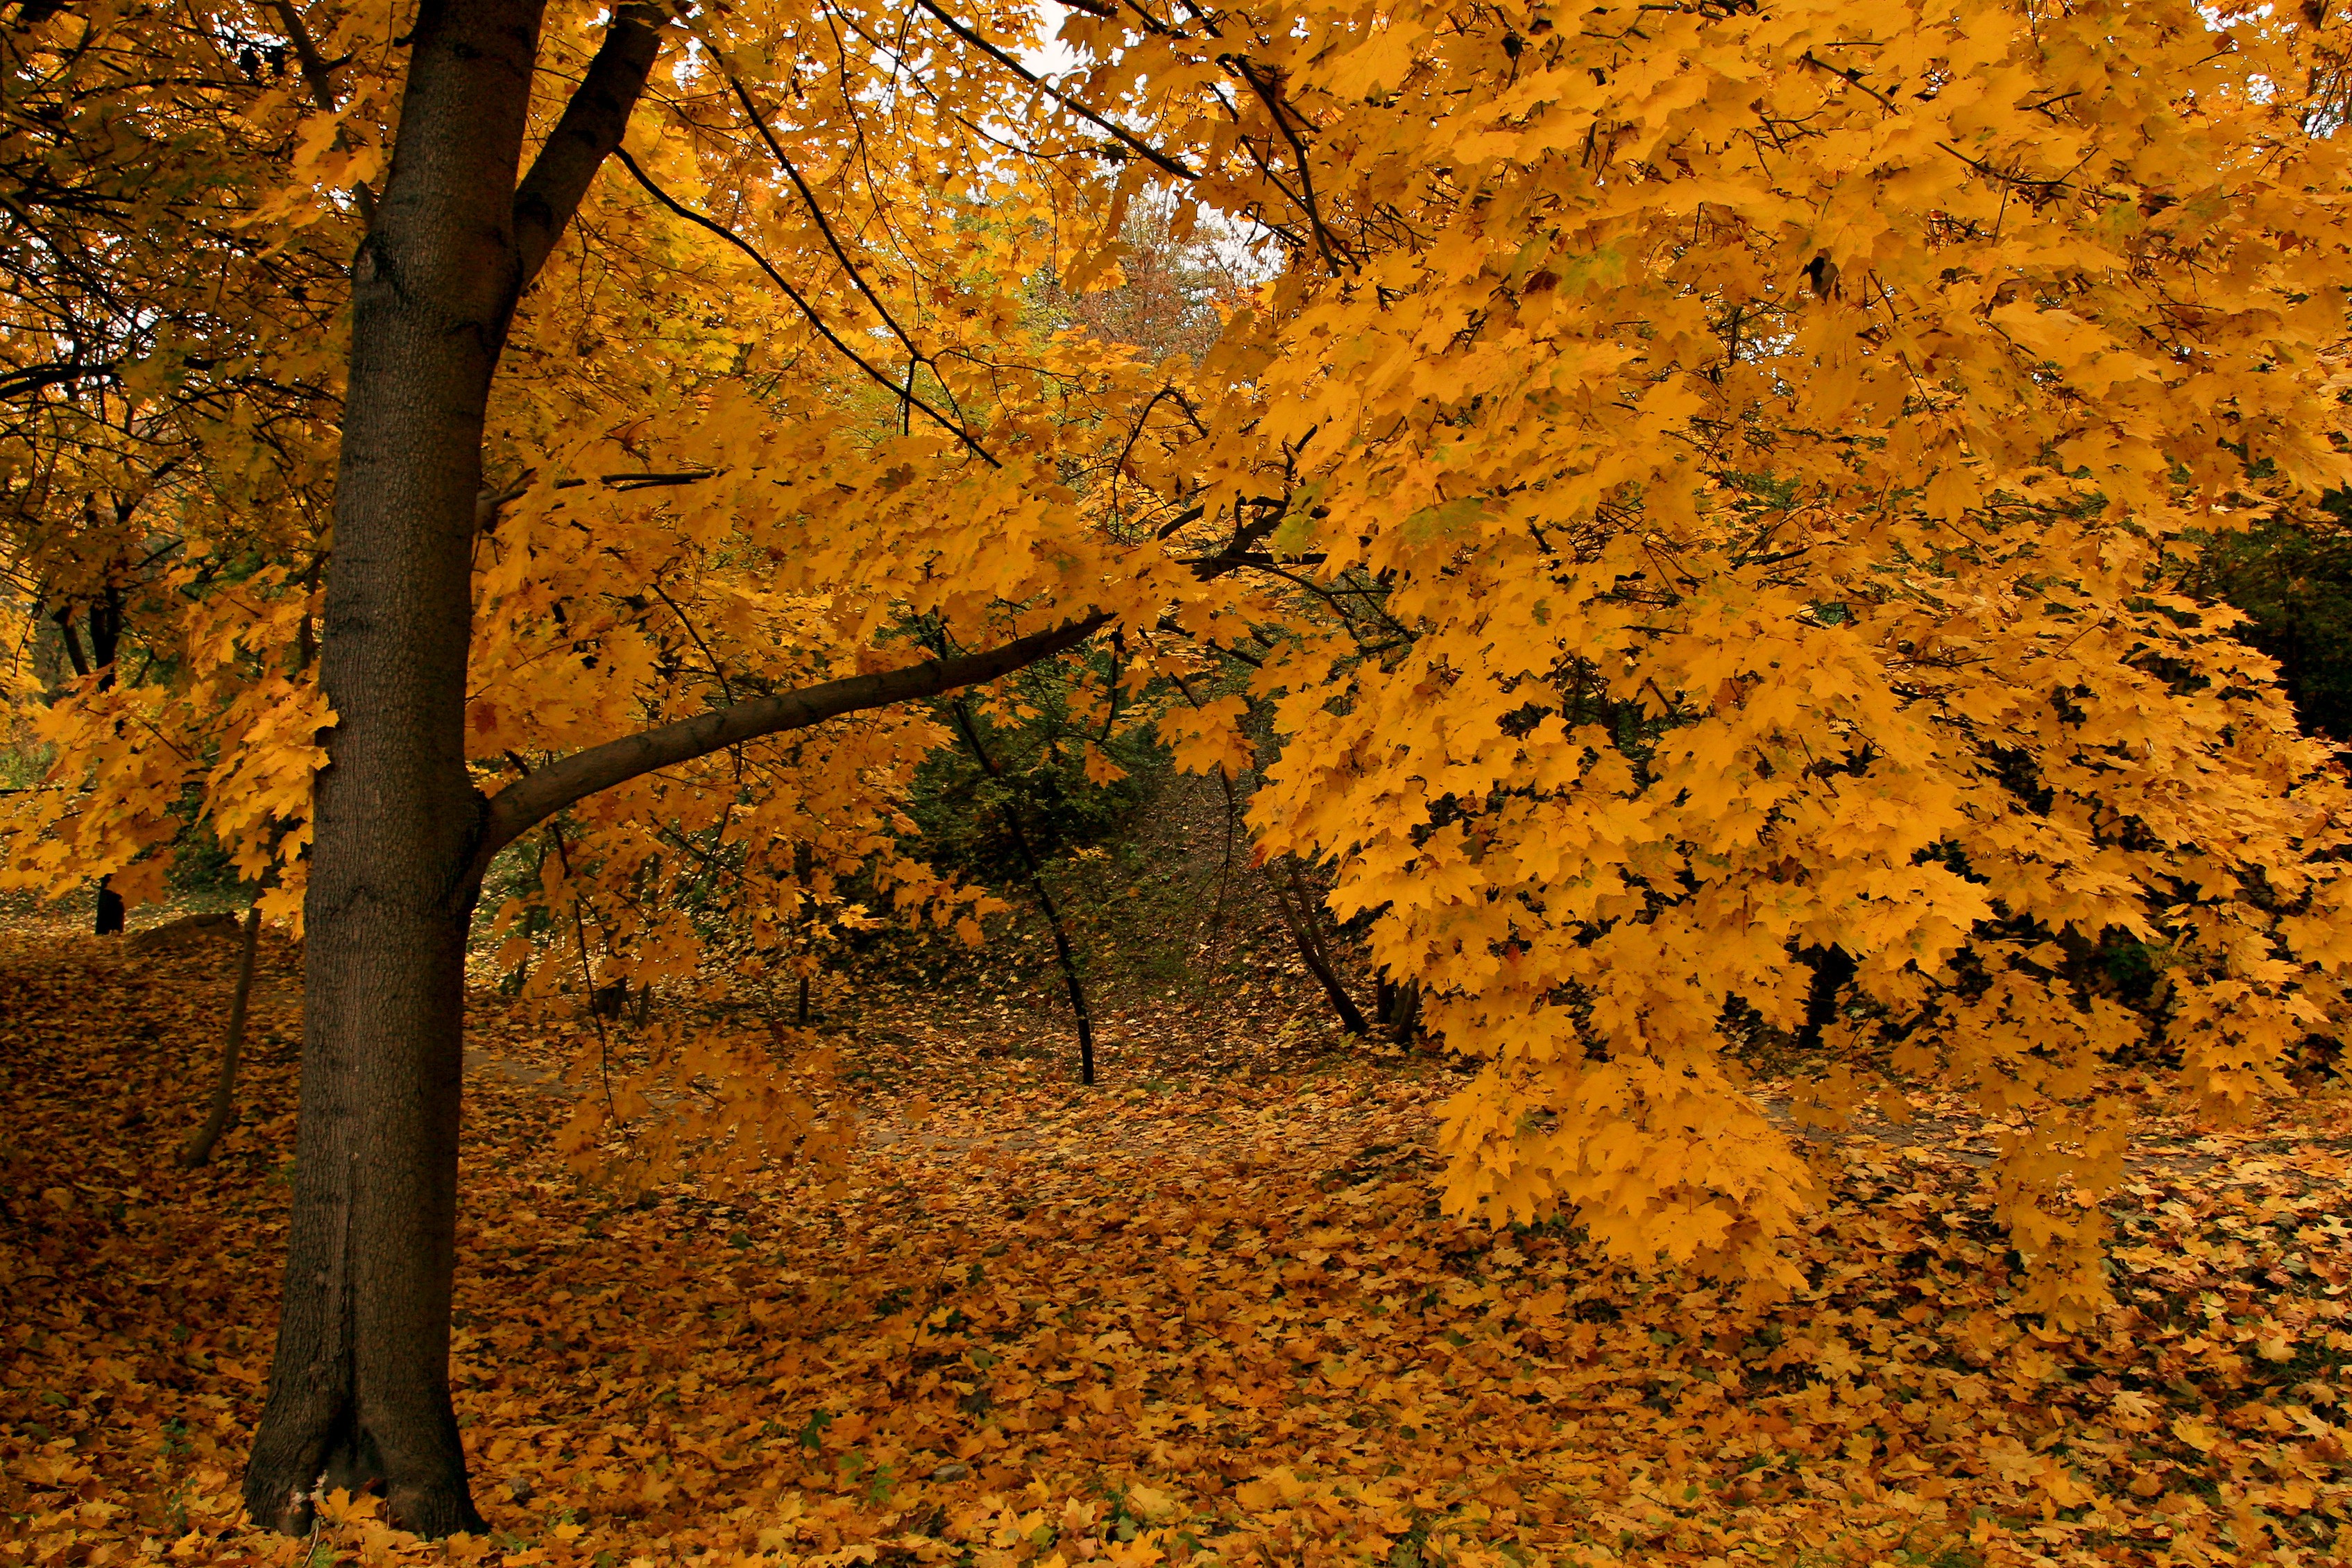 General 3390x2260 forest fall leaves trees nature fallen leaves